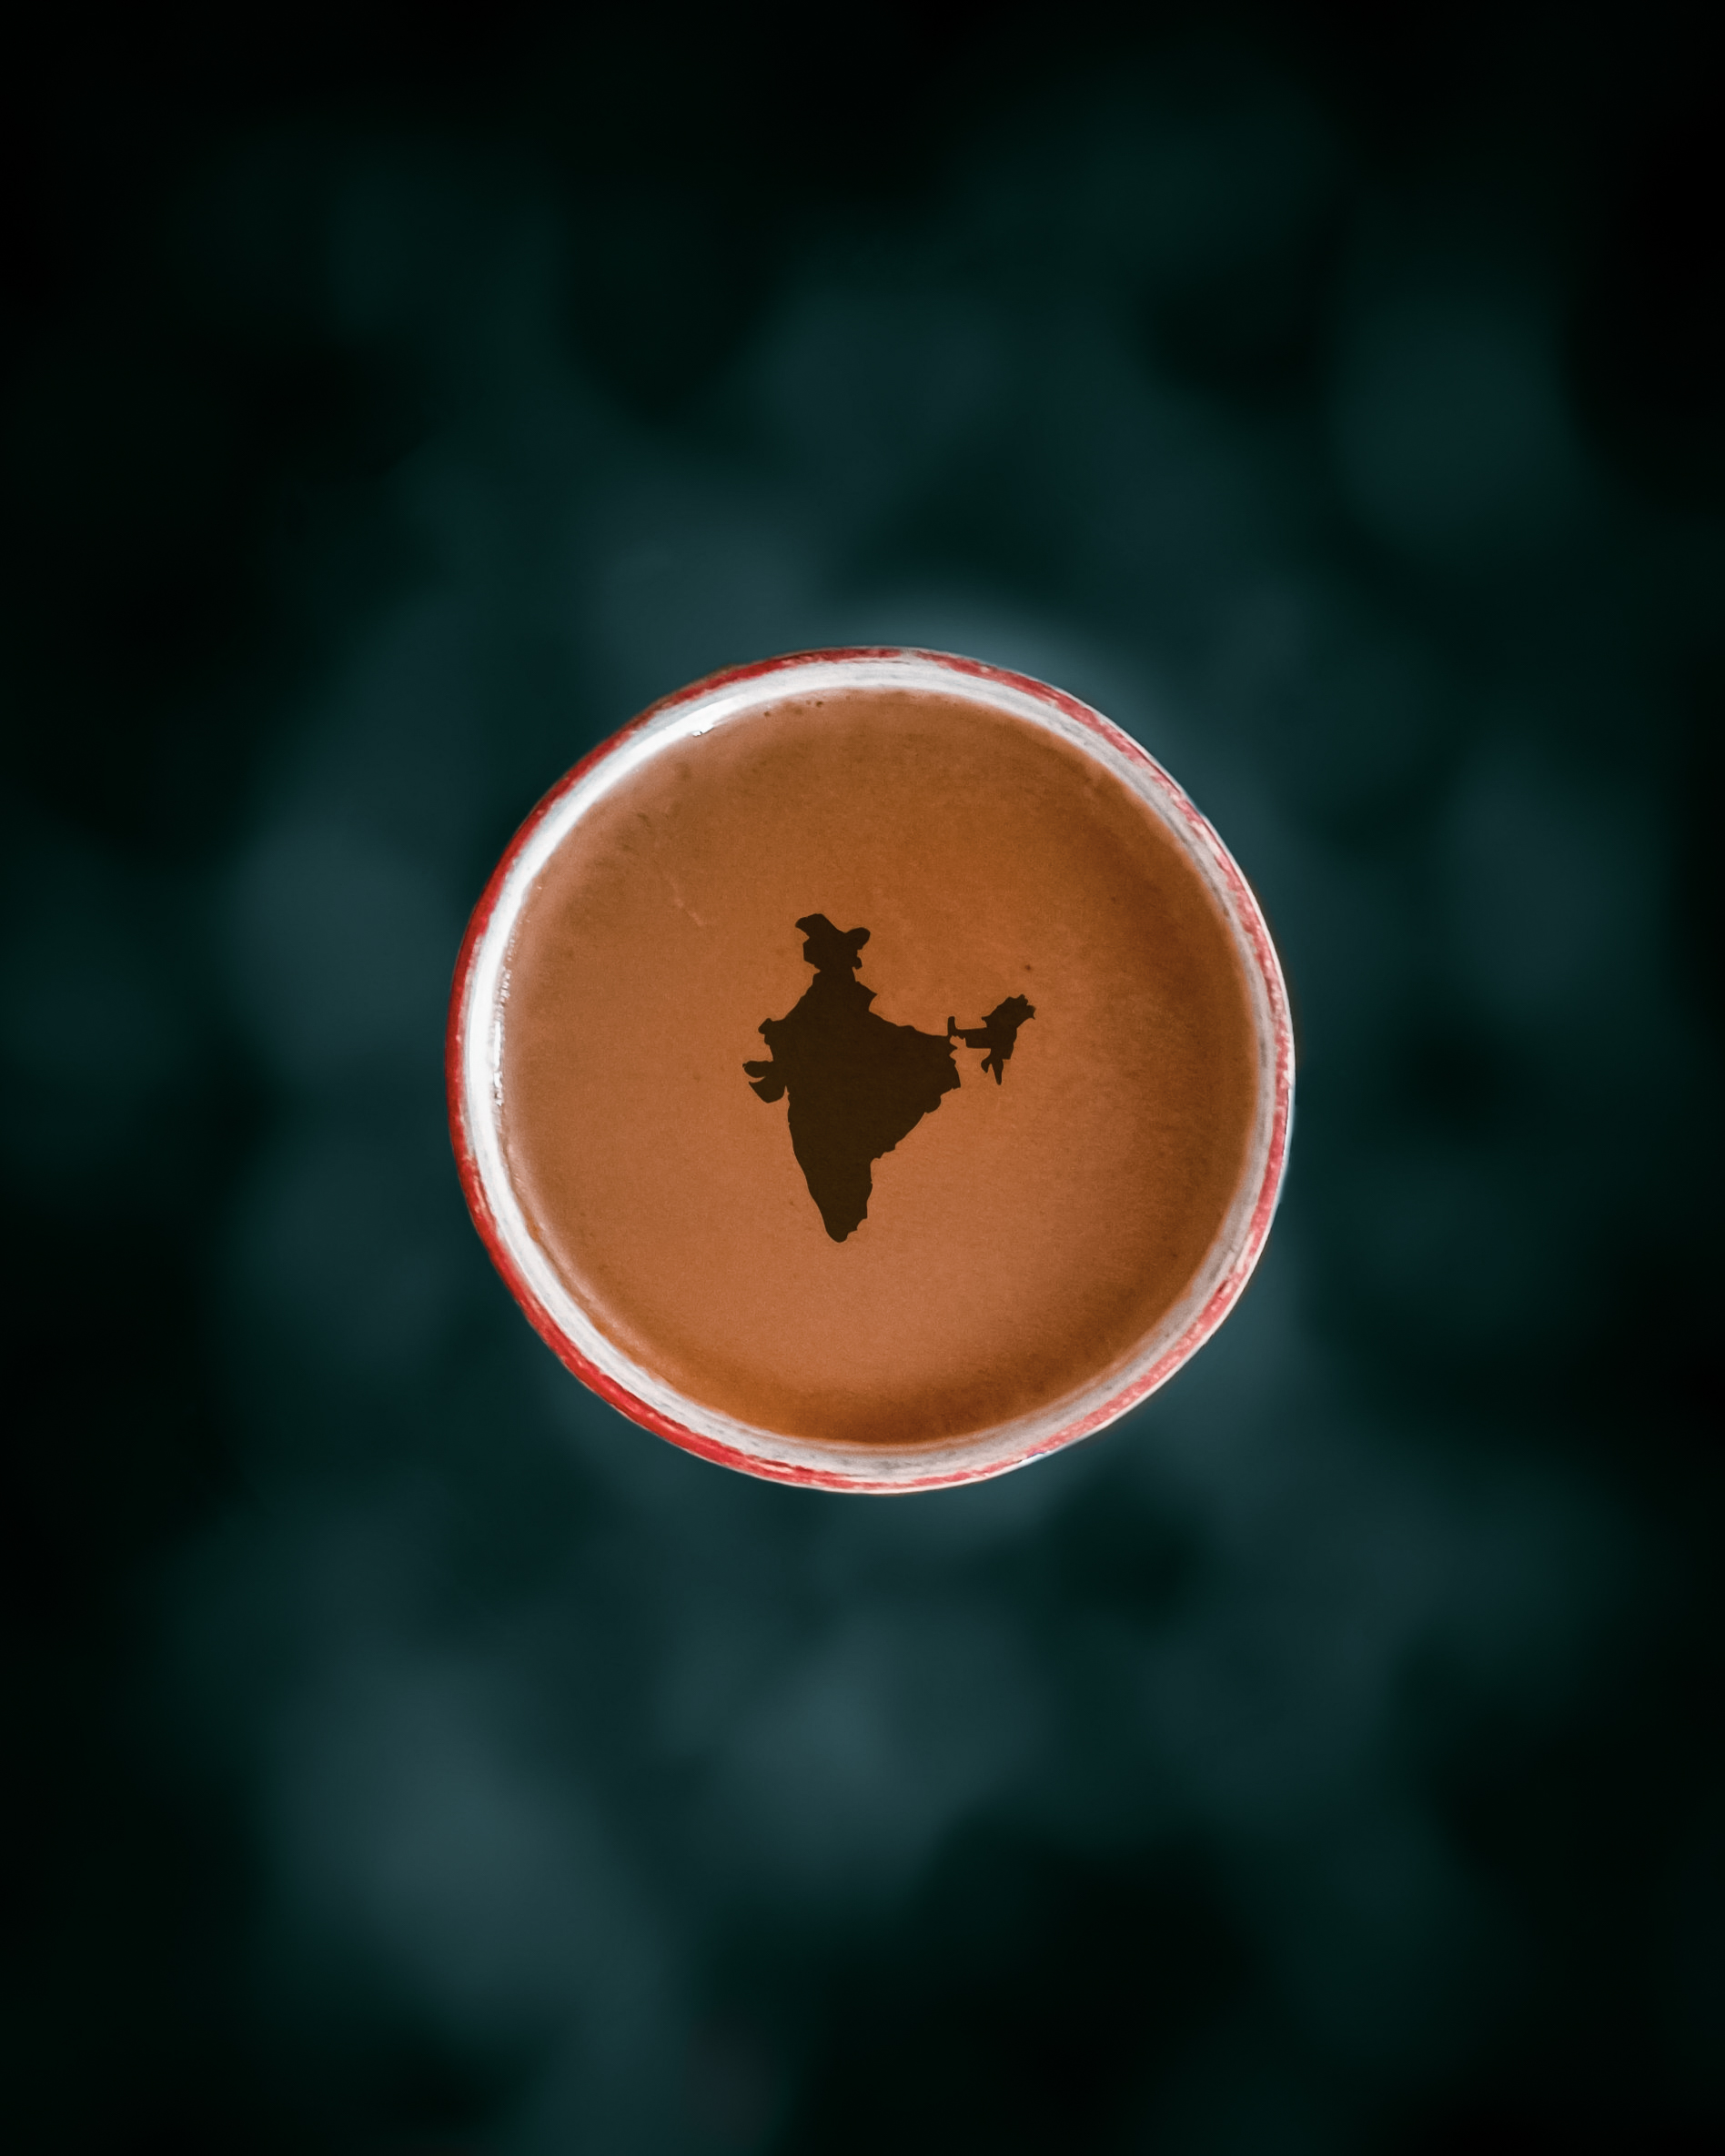 Indian map on a tea